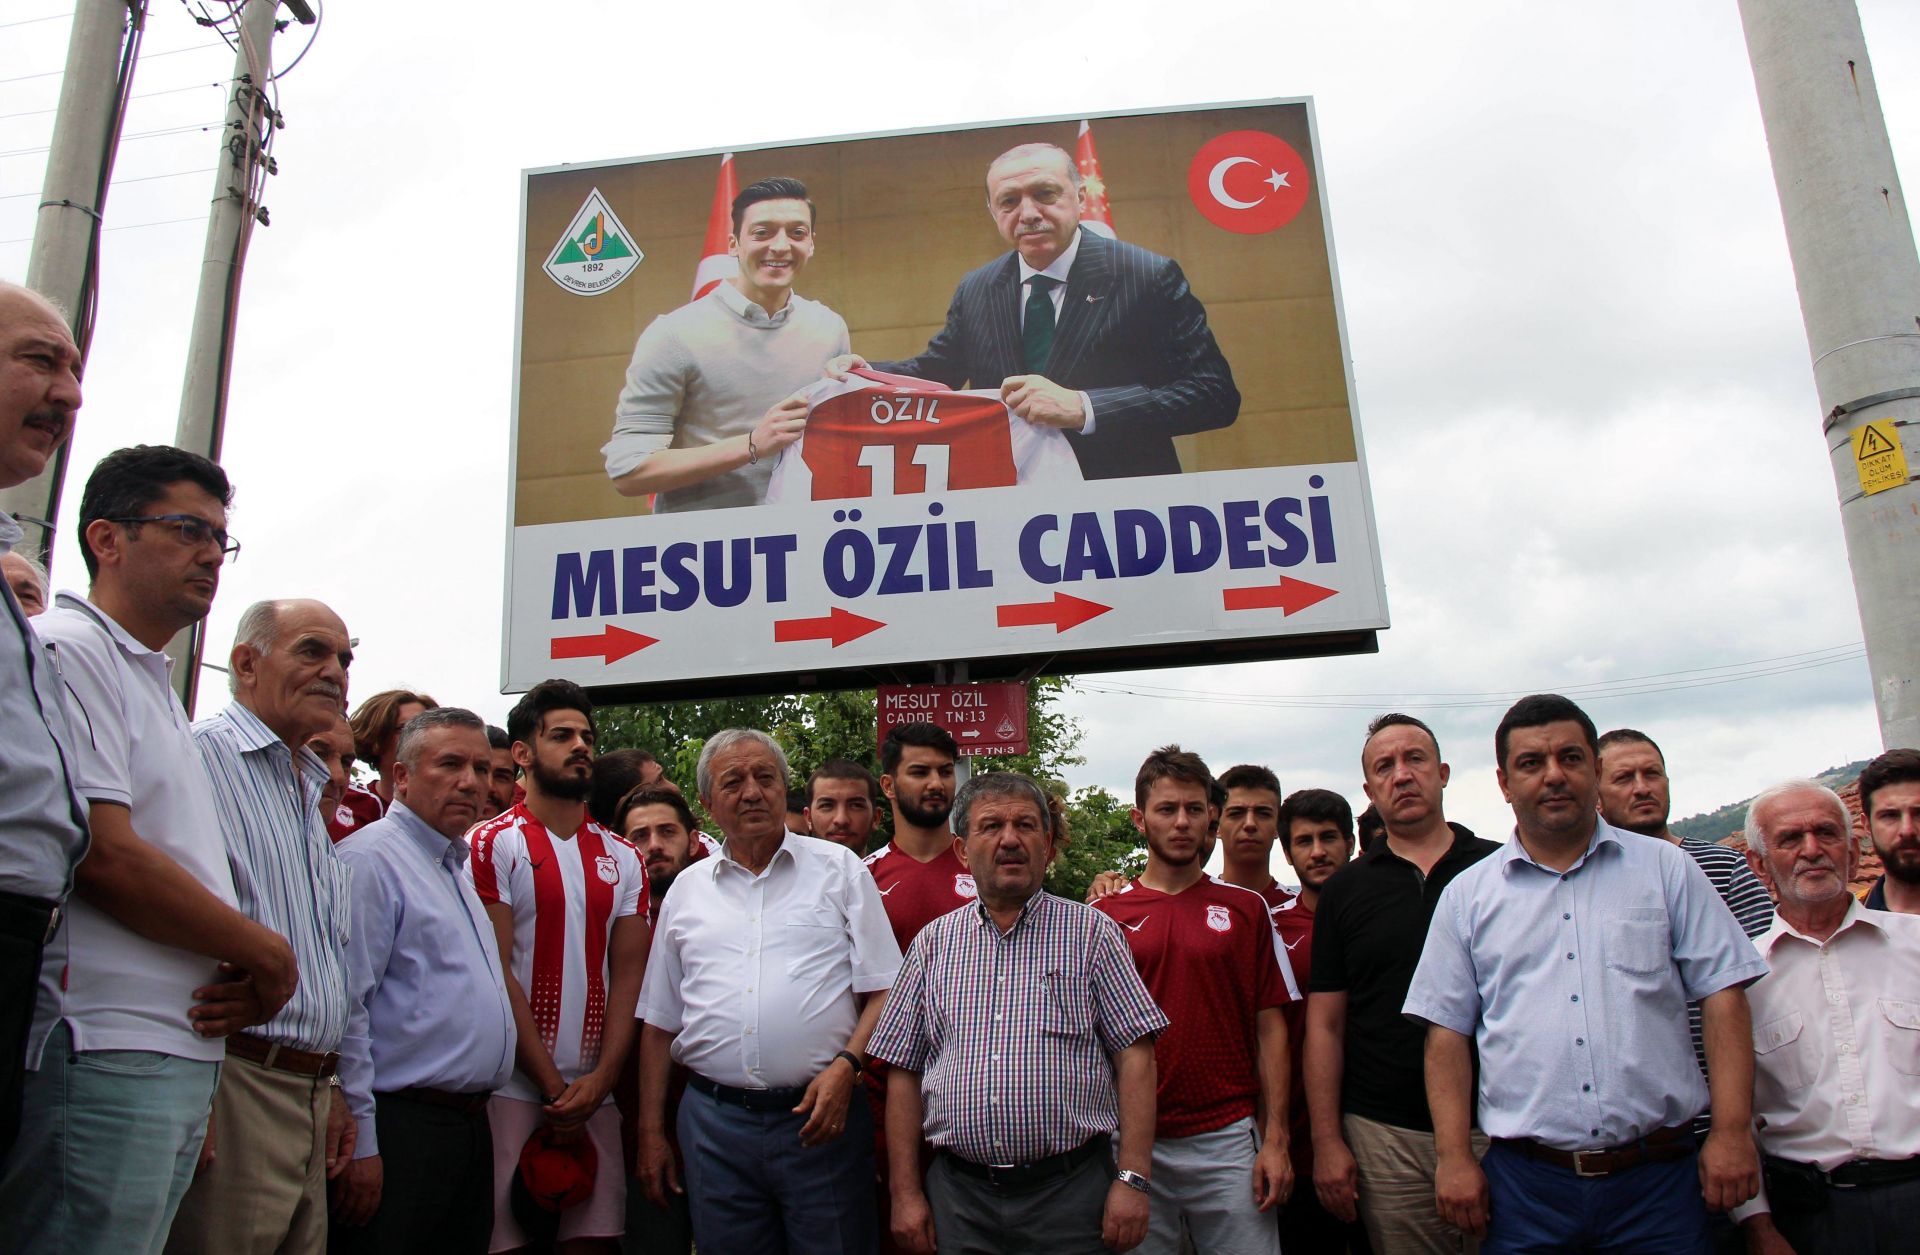 The Turkish city of Zonguldak used a photo of German soccer star Mesut Ozil posing with President Recep Tayyip Erdogan during a ceremony in which a city street was named for the footballer, who has Turkish ancestry.